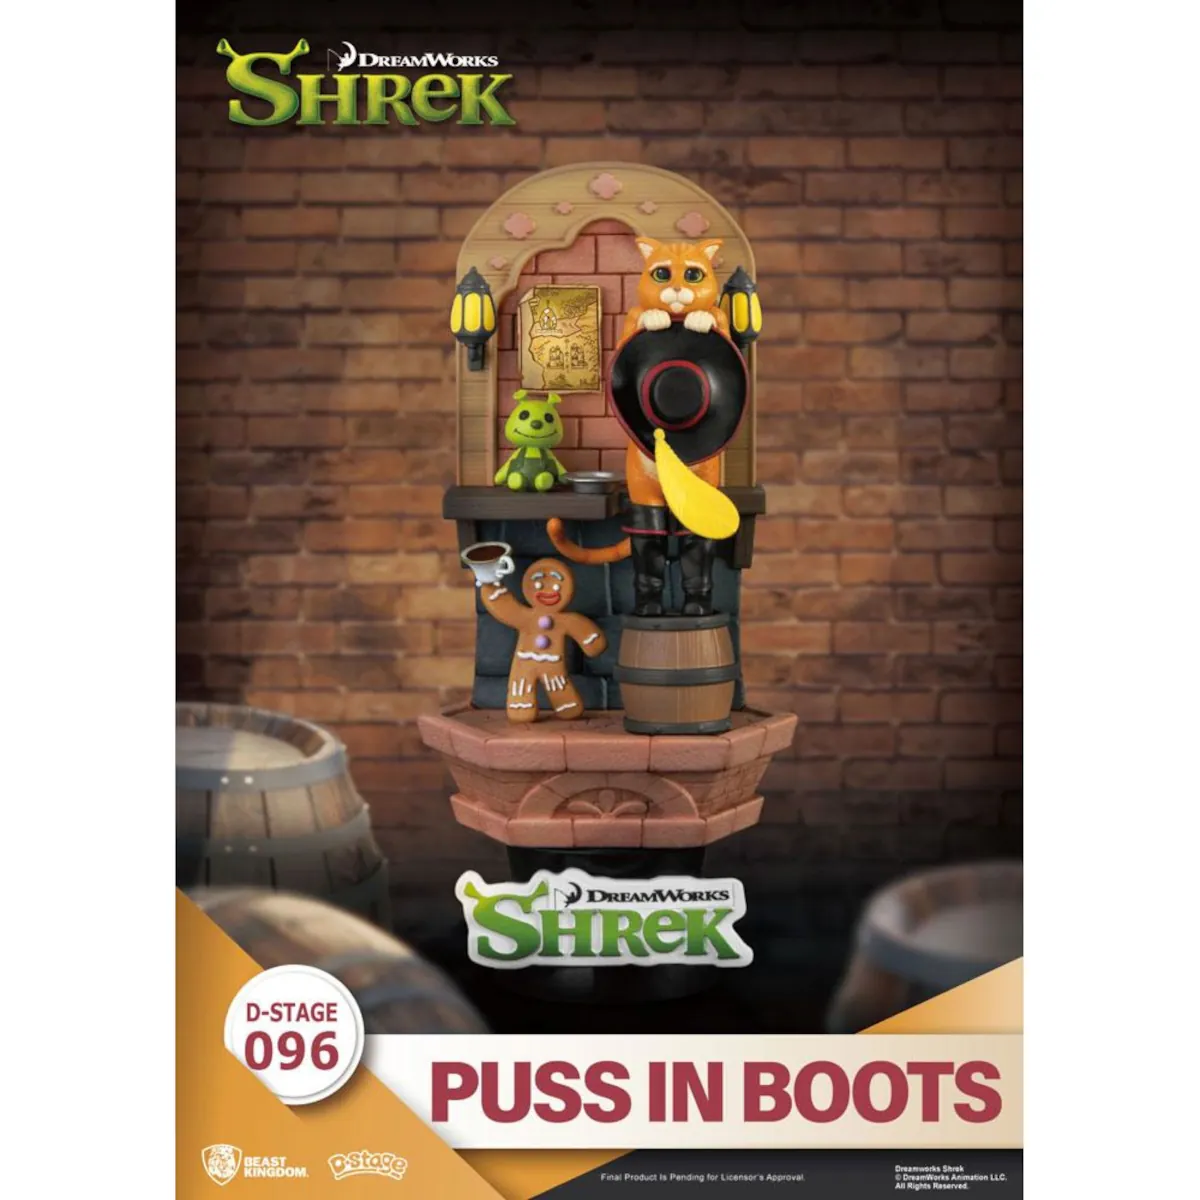 DS-096 DreamWorks Shrek D-Stage 15.5cm Puss in Boots PVC Diorama